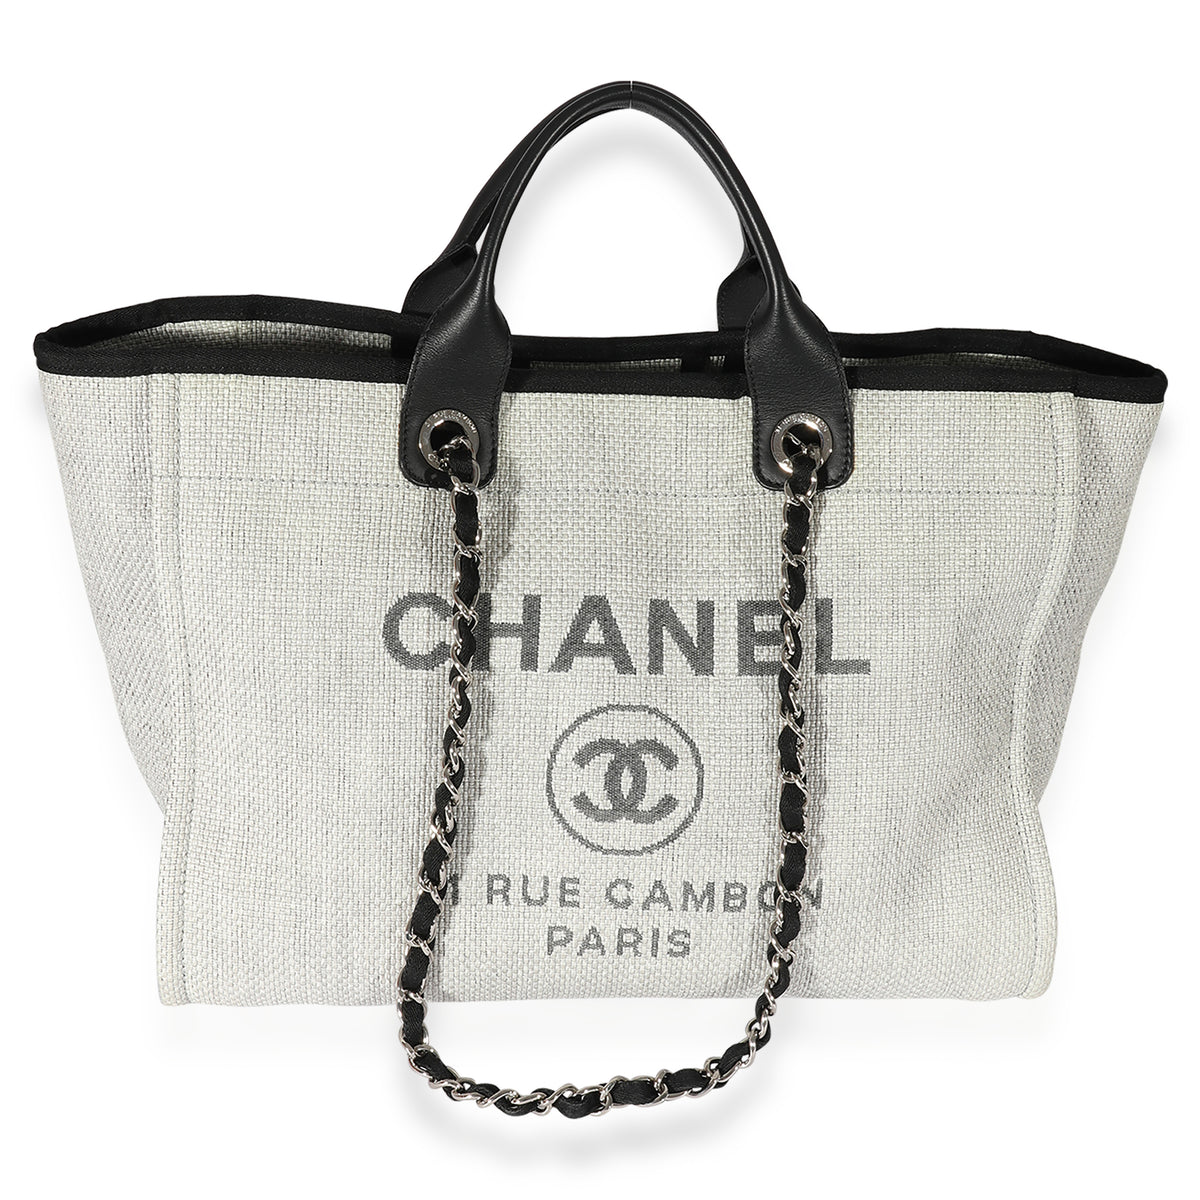 Chanel Small Deauville Shopping Bag Blue Boucle Silver Hardware